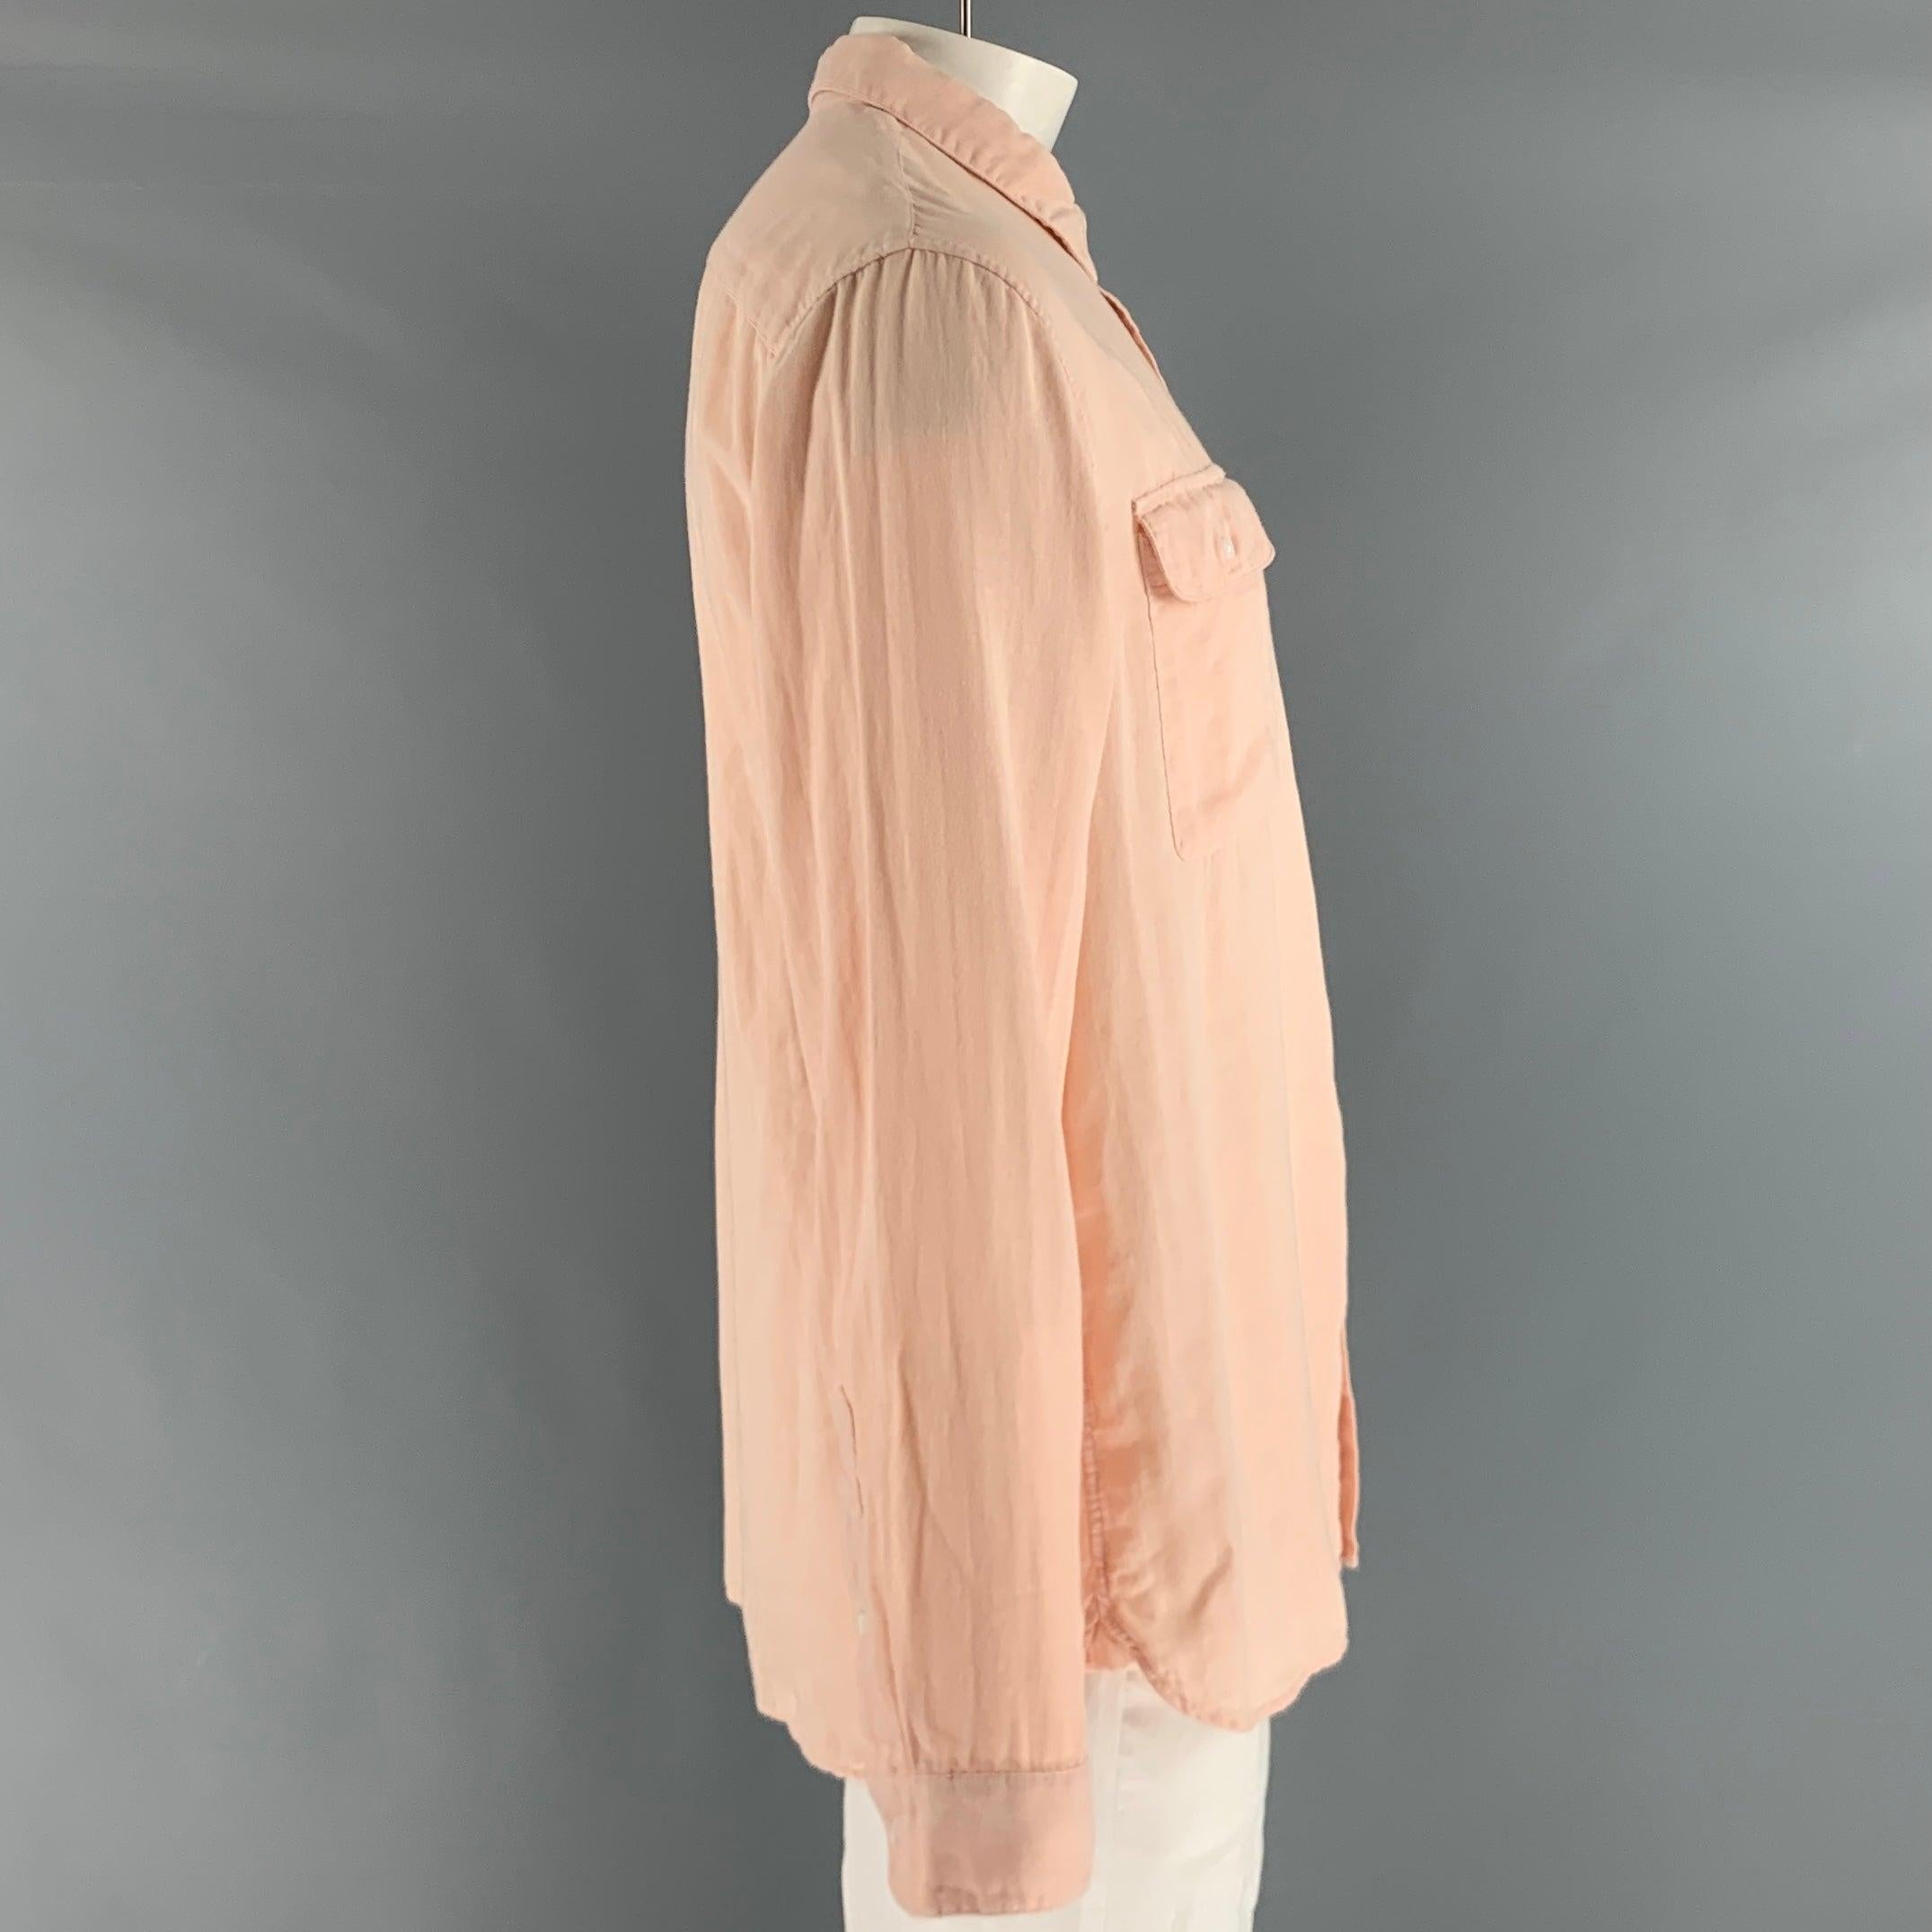 VINCE long sleeve shirt comes in an orange sorbet cotton woven material featuring a classic fit, patch pocket at front, and button closure.New with Tags. 

Marked:   XL 

Measurements: 
 
Shoulder: 19.5 inches Chest: 42 inches Sleeve: 27 inches